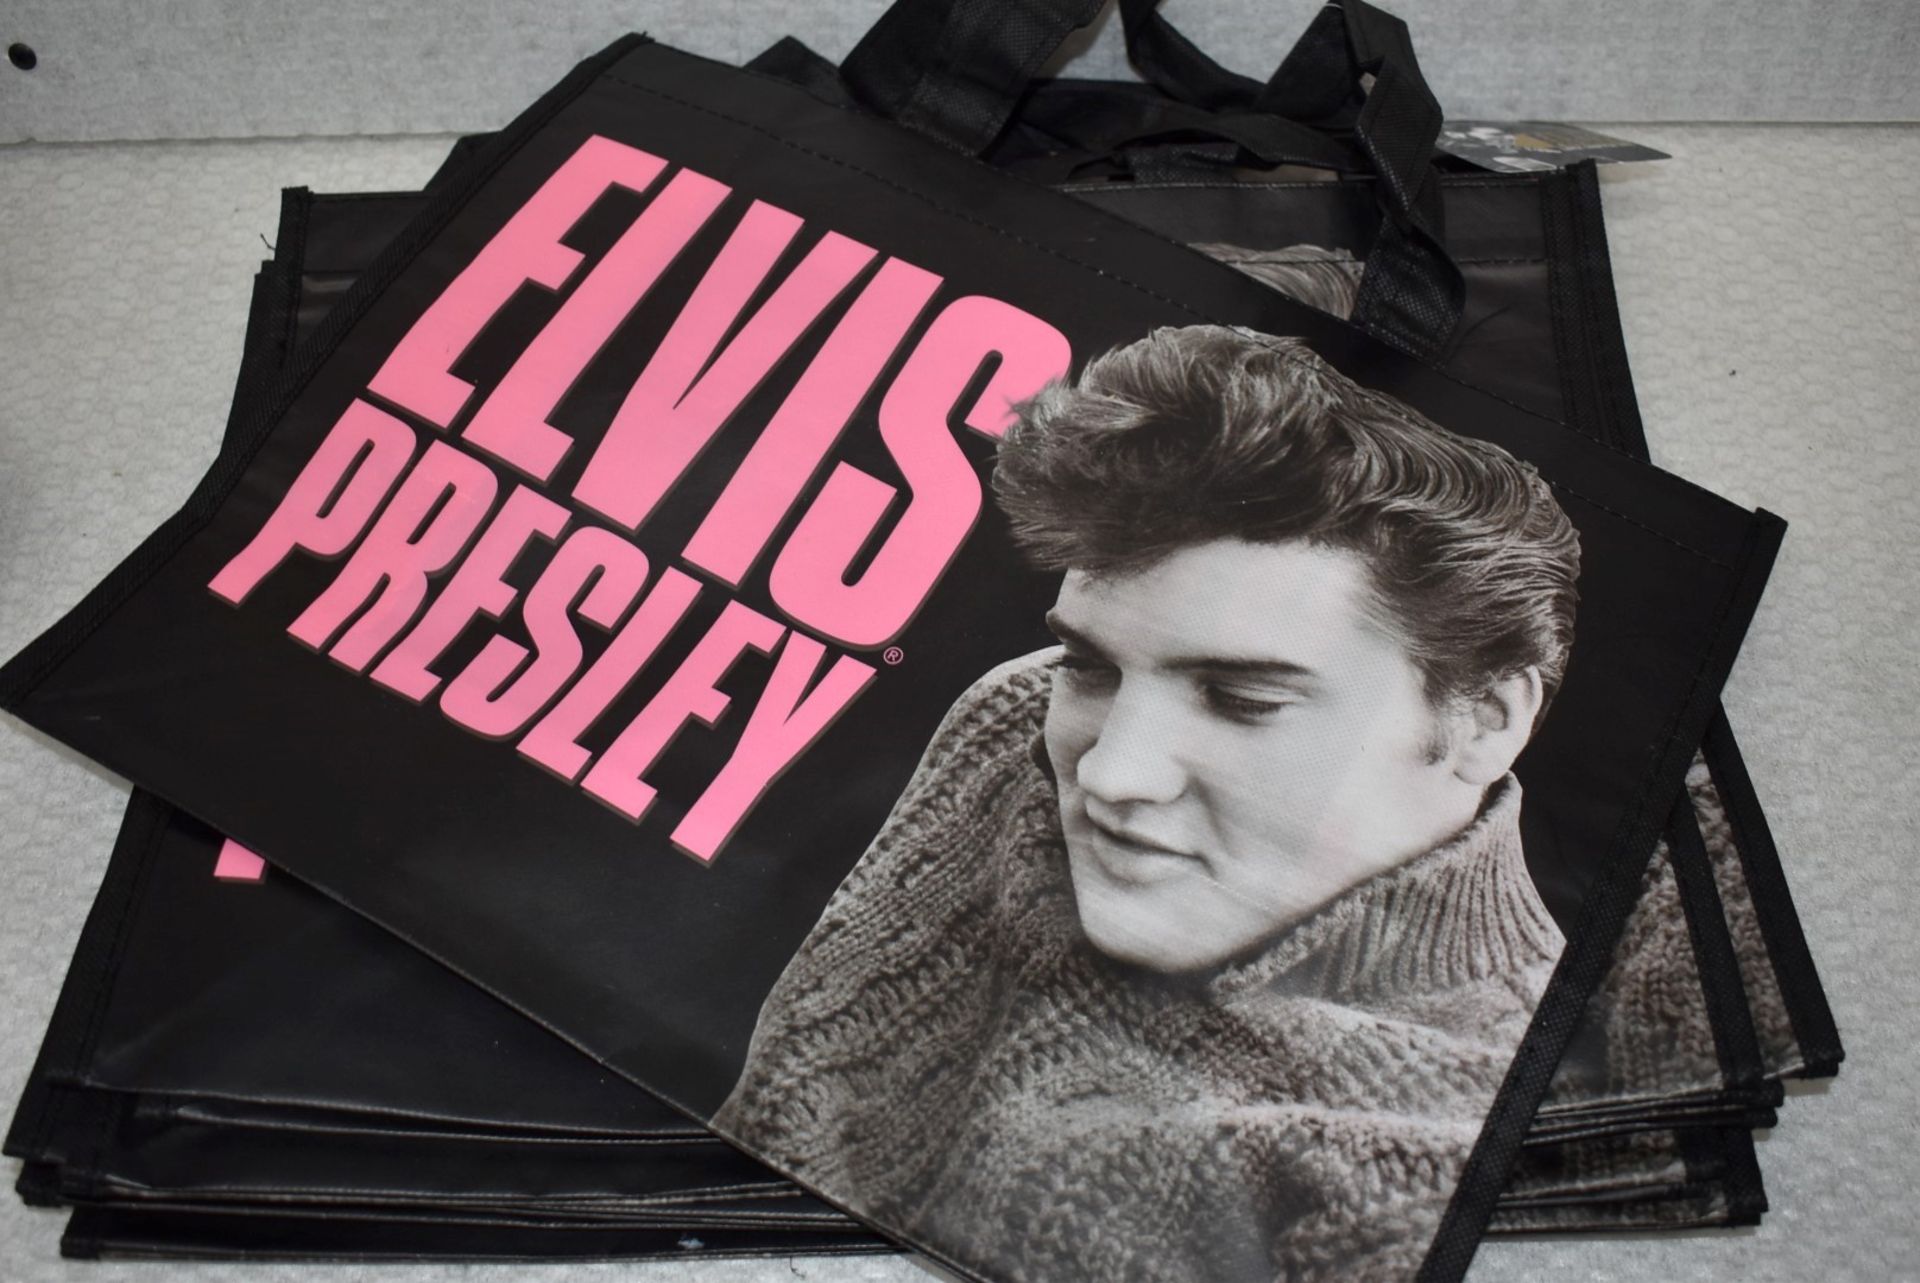 8 x Elvis Presley Eco Tote Shopper Bags - Size: 40 x 30 cms - Polypropylene Eco Material With - Image 3 of 4